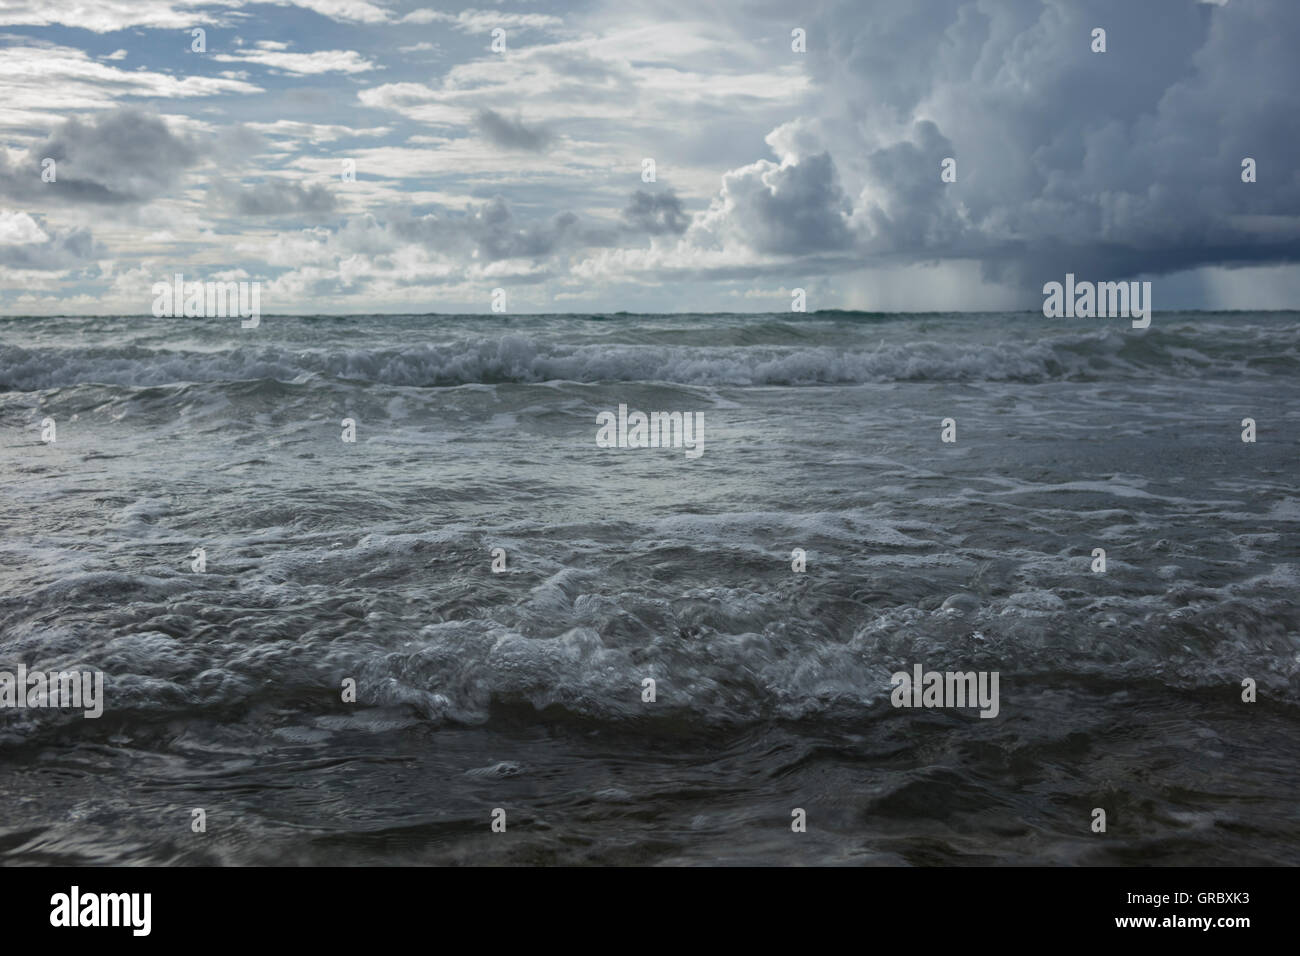 Stormy Atmosphere Over Stormy Ocean. Selayar, South Sulawesi, Indonesia Stock Photo